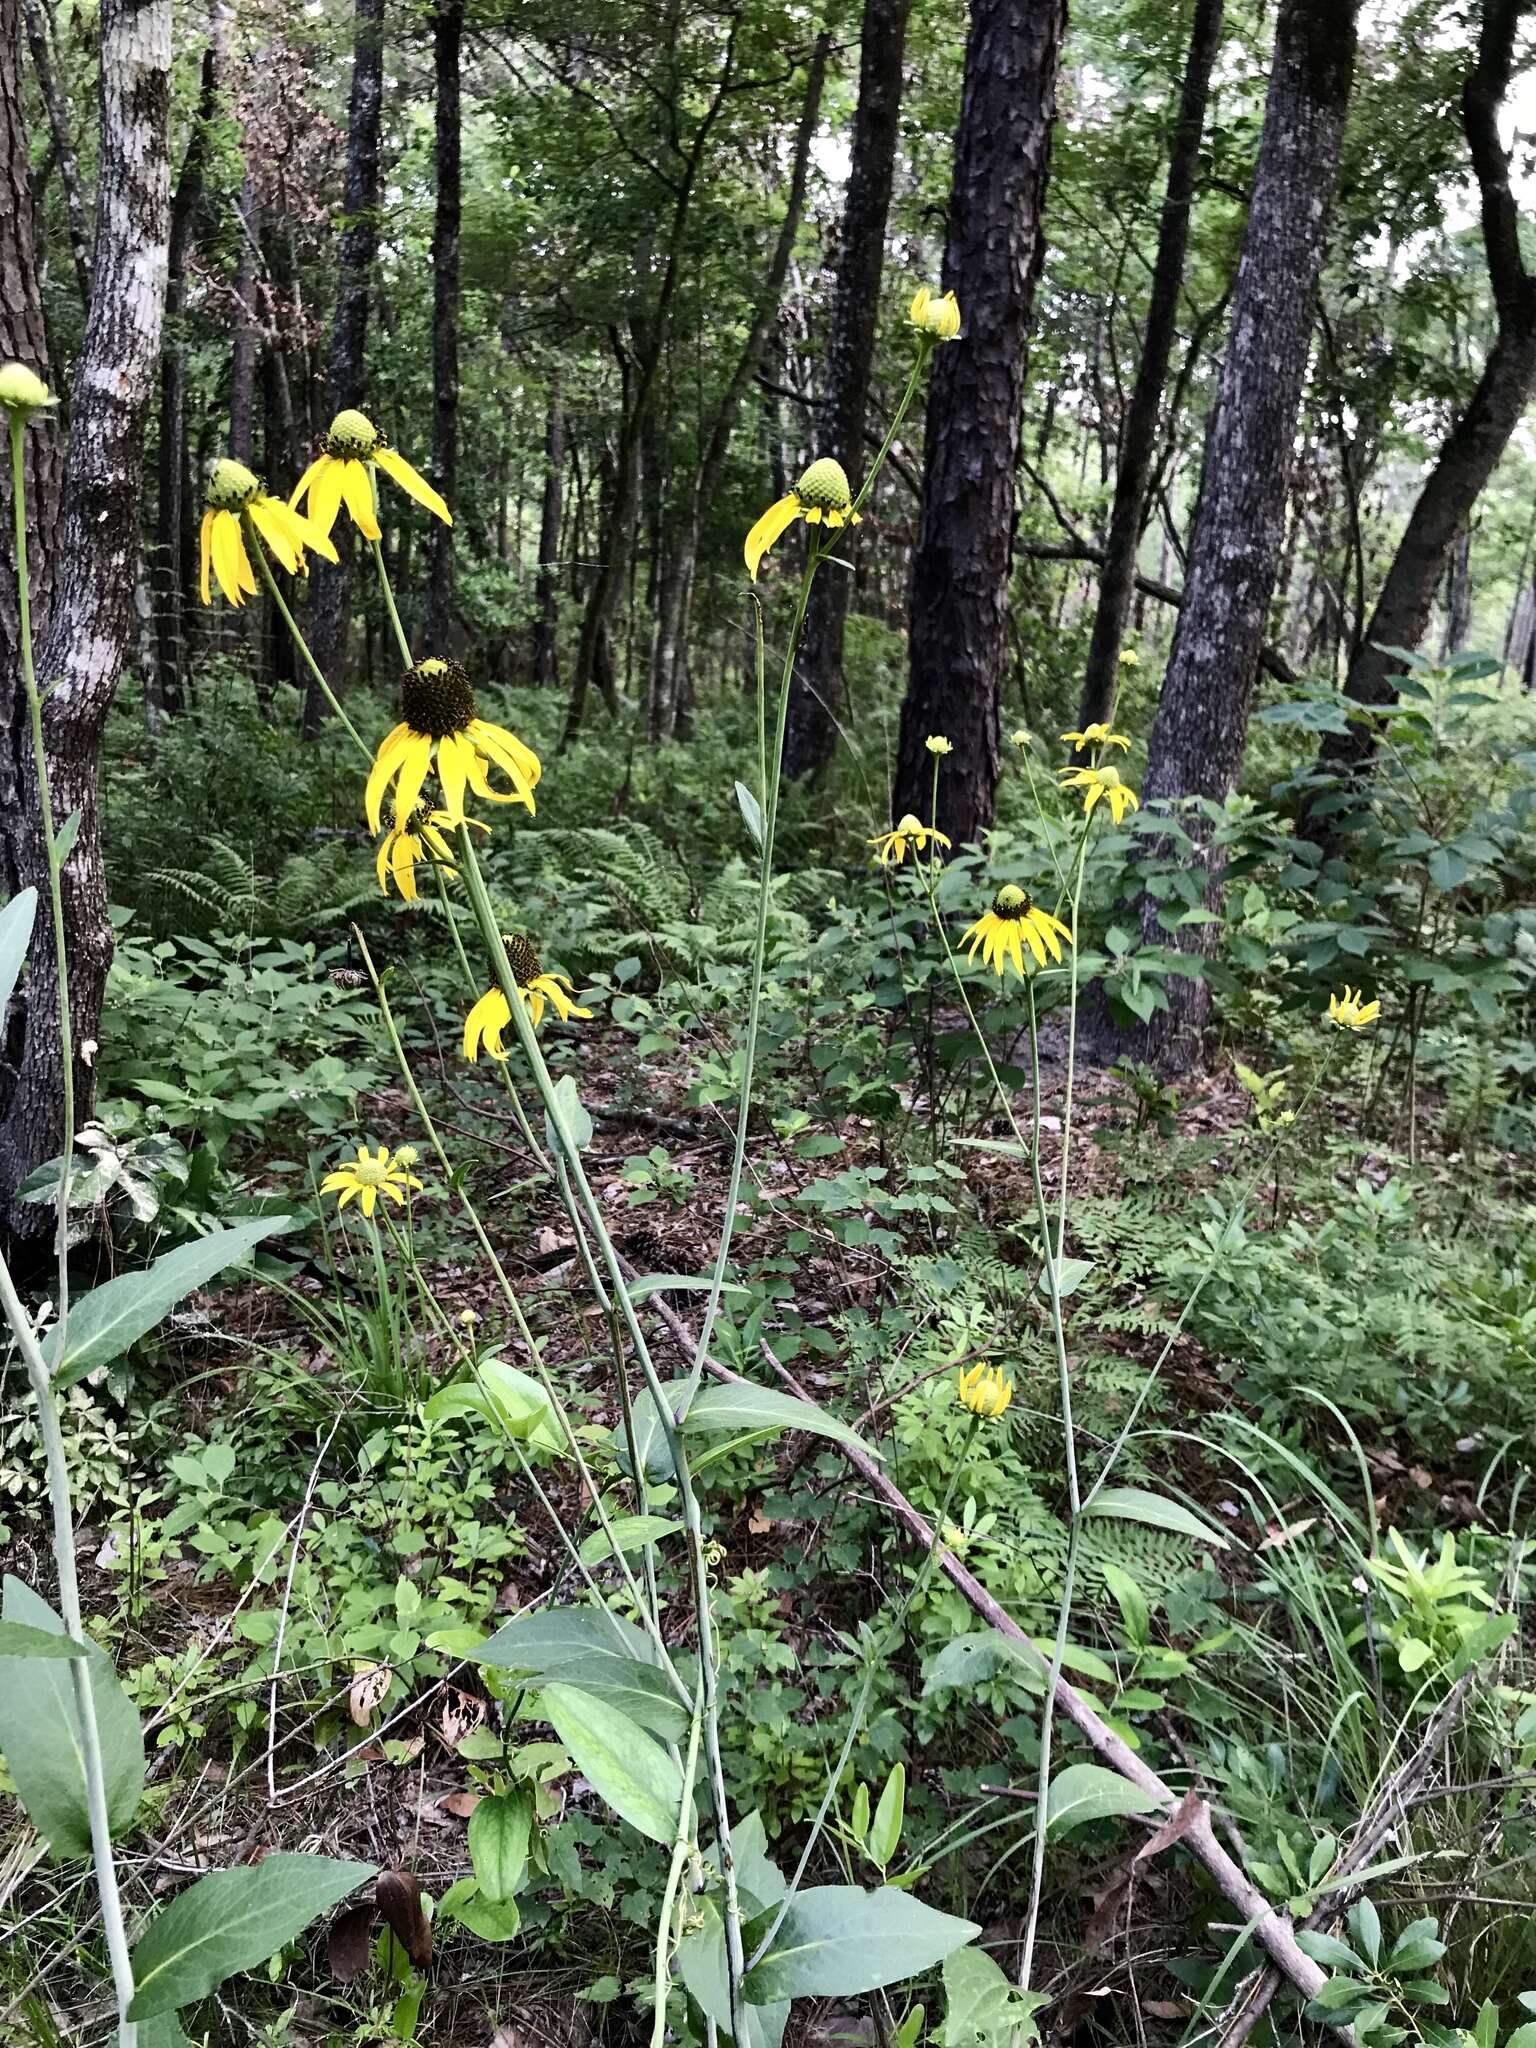 Image of roughleaf coneflower